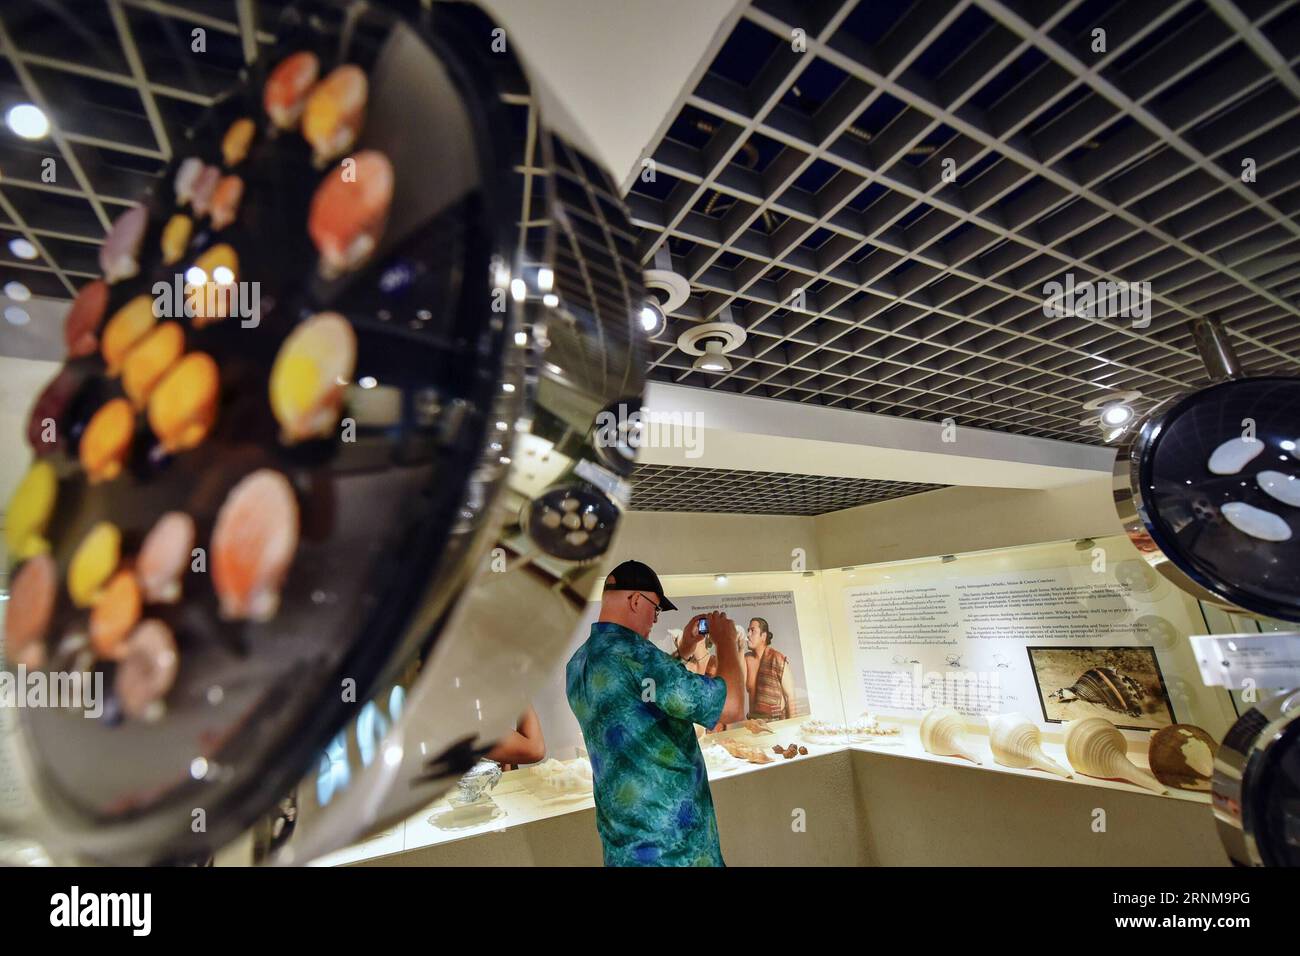 (170518) -- BANGKOK, May 18, 2017 -- A tourist takes photos of conches at the Bangkok Seashell Museum in Bangkok, Thailand, May 18, 2017. Embracing a collection of over 3,000 specimens of 600 species, the Bangkok Seashell Museum not only enchants its visitors with a kaleidoscope of natural shapes and colors, but also serves as a knowledge source for those interested in the evolution and classification of shelled animals. ) (hy) THAILAND-BANGKOK-SEASHELL-MUSEUM-COLLECTION LixMangmang PUBLICATIONxNOTxINxCHN   Bangkok May 18 2017 a Tourist Takes Photos of conches AT The Bangkok Seashell Museum in Stock Photo